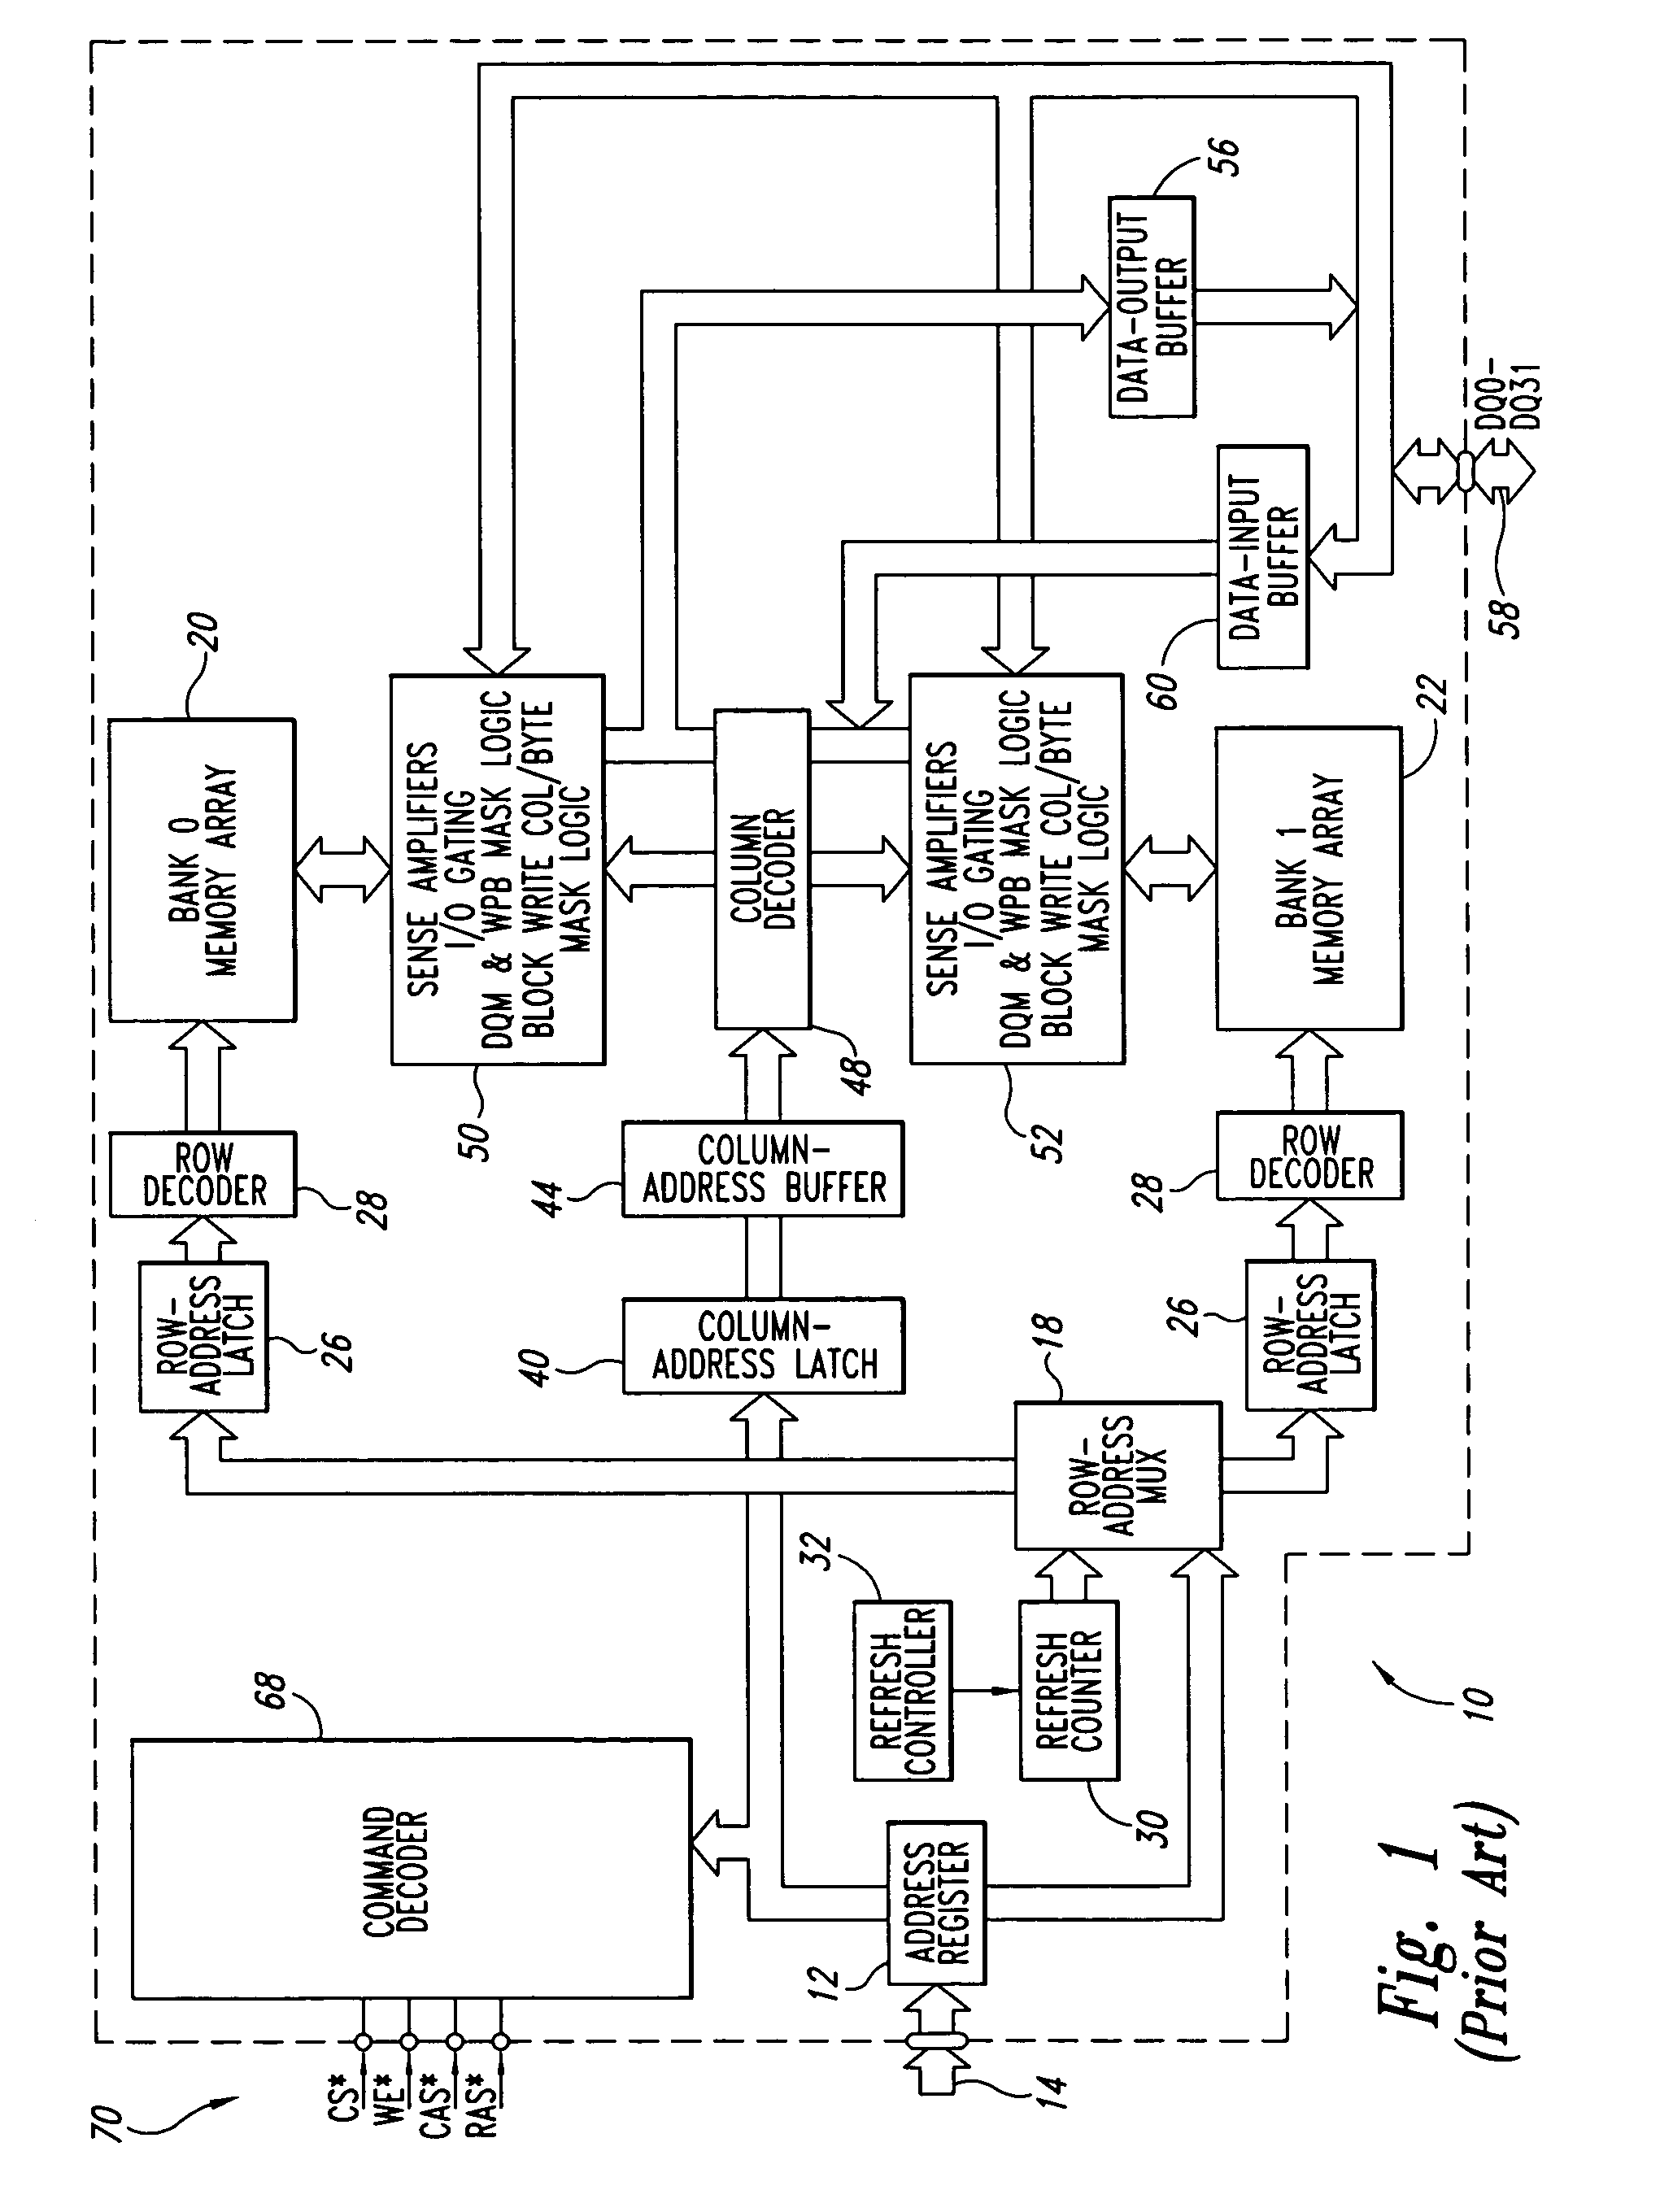 Data path having grounded precharge operation and test compression capability